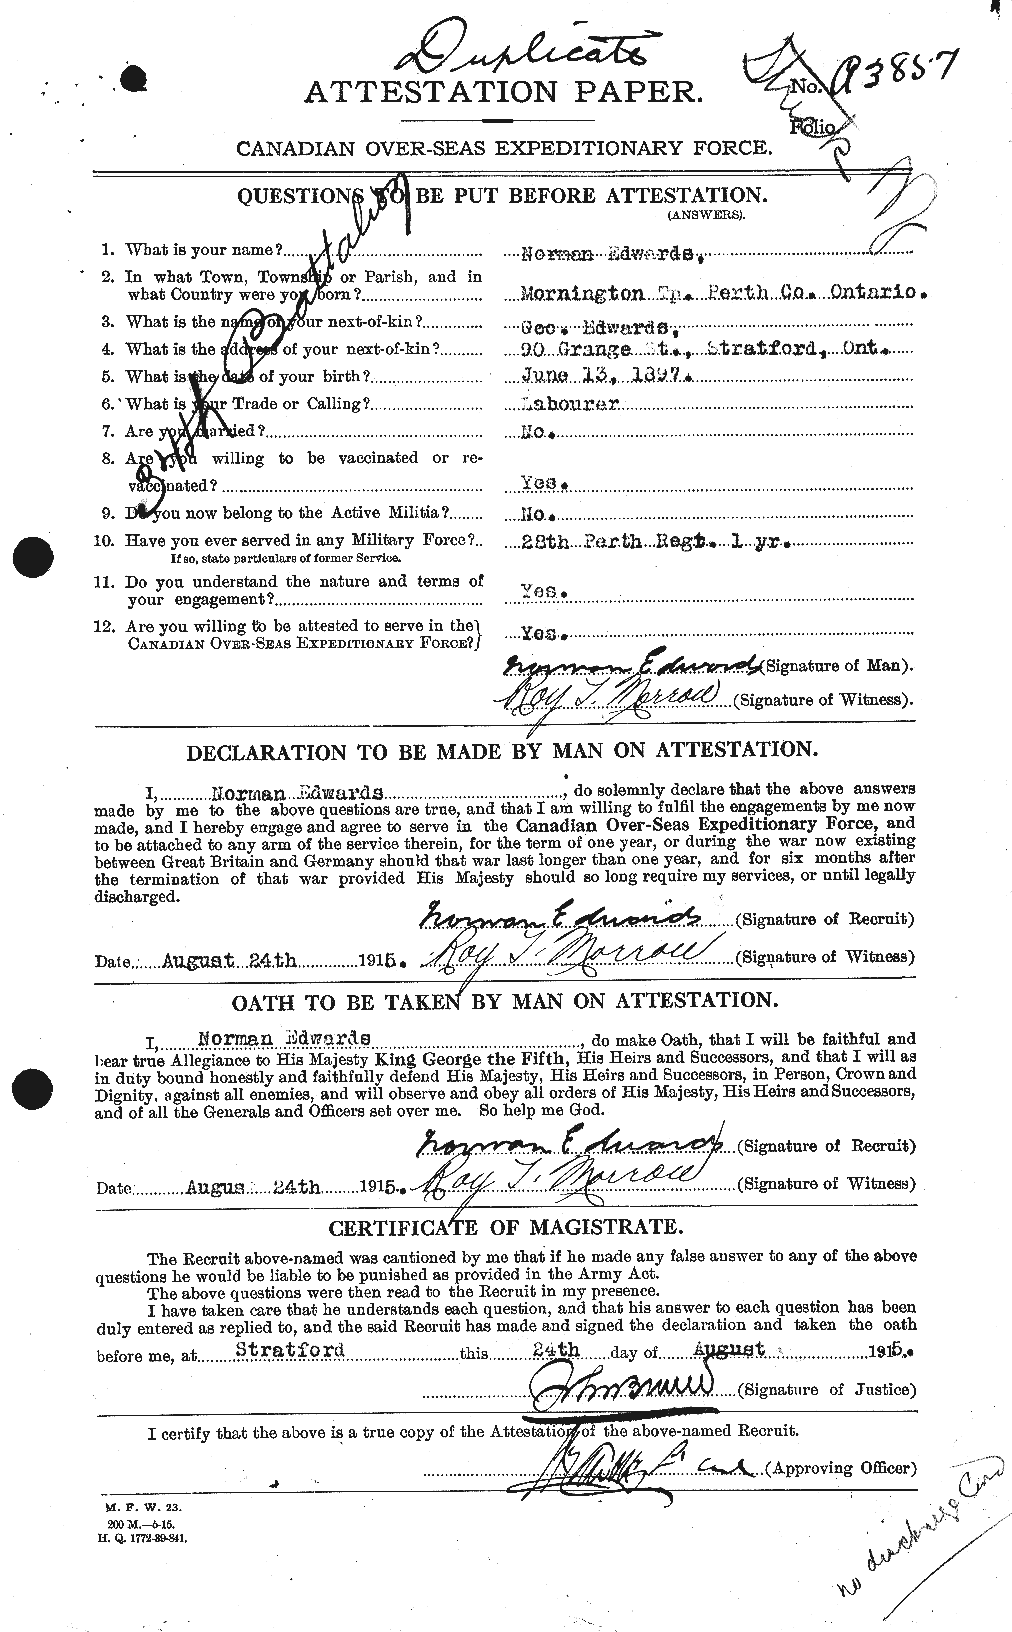 Personnel Records of the First World War - CEF 310222a